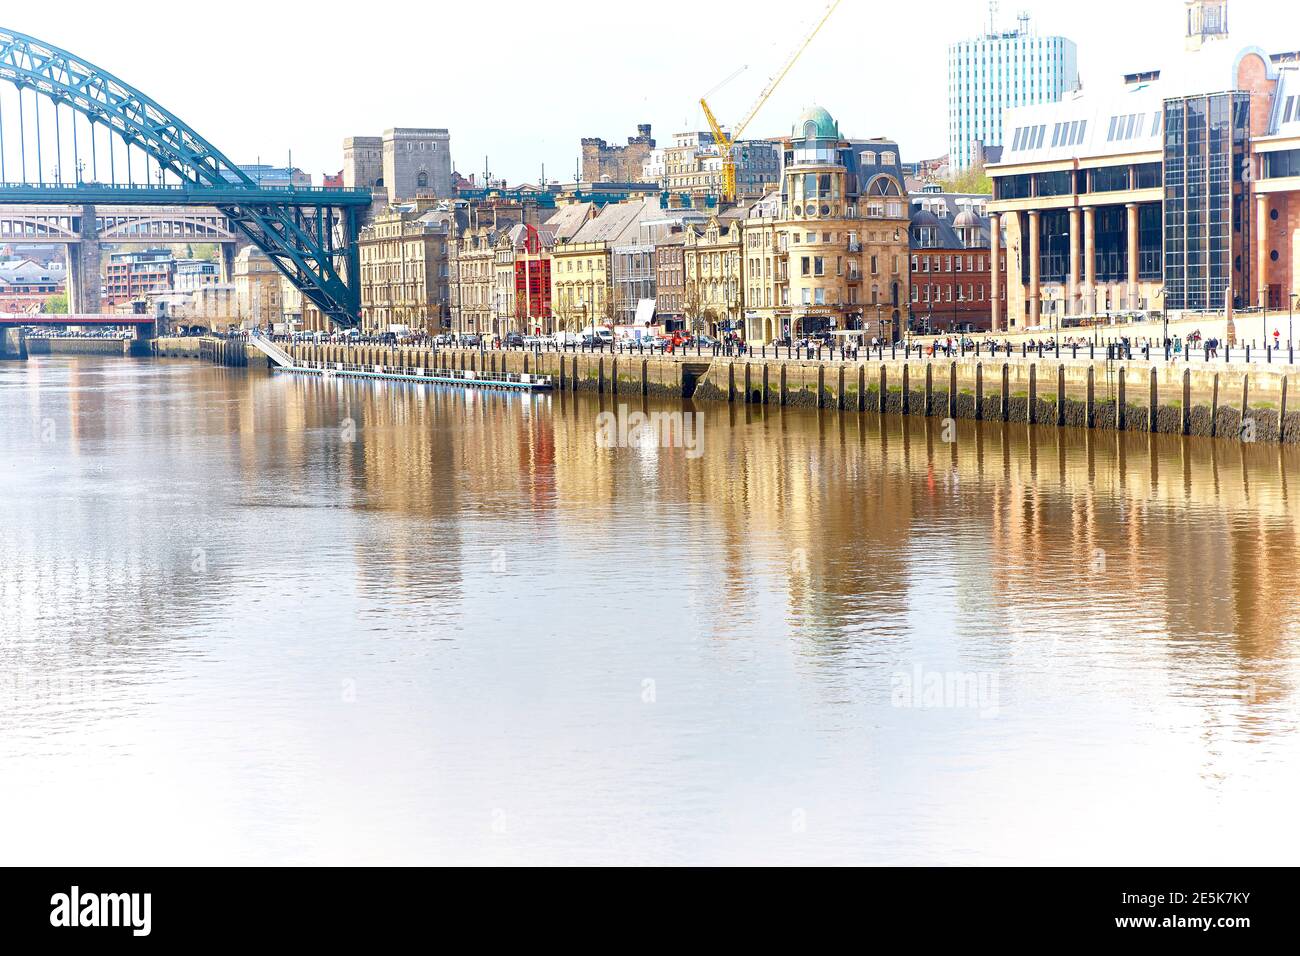 View of the Quayside from Gateshead in Newcastle Upon Tyne, Tyneside, North East England, UK Stock Photo